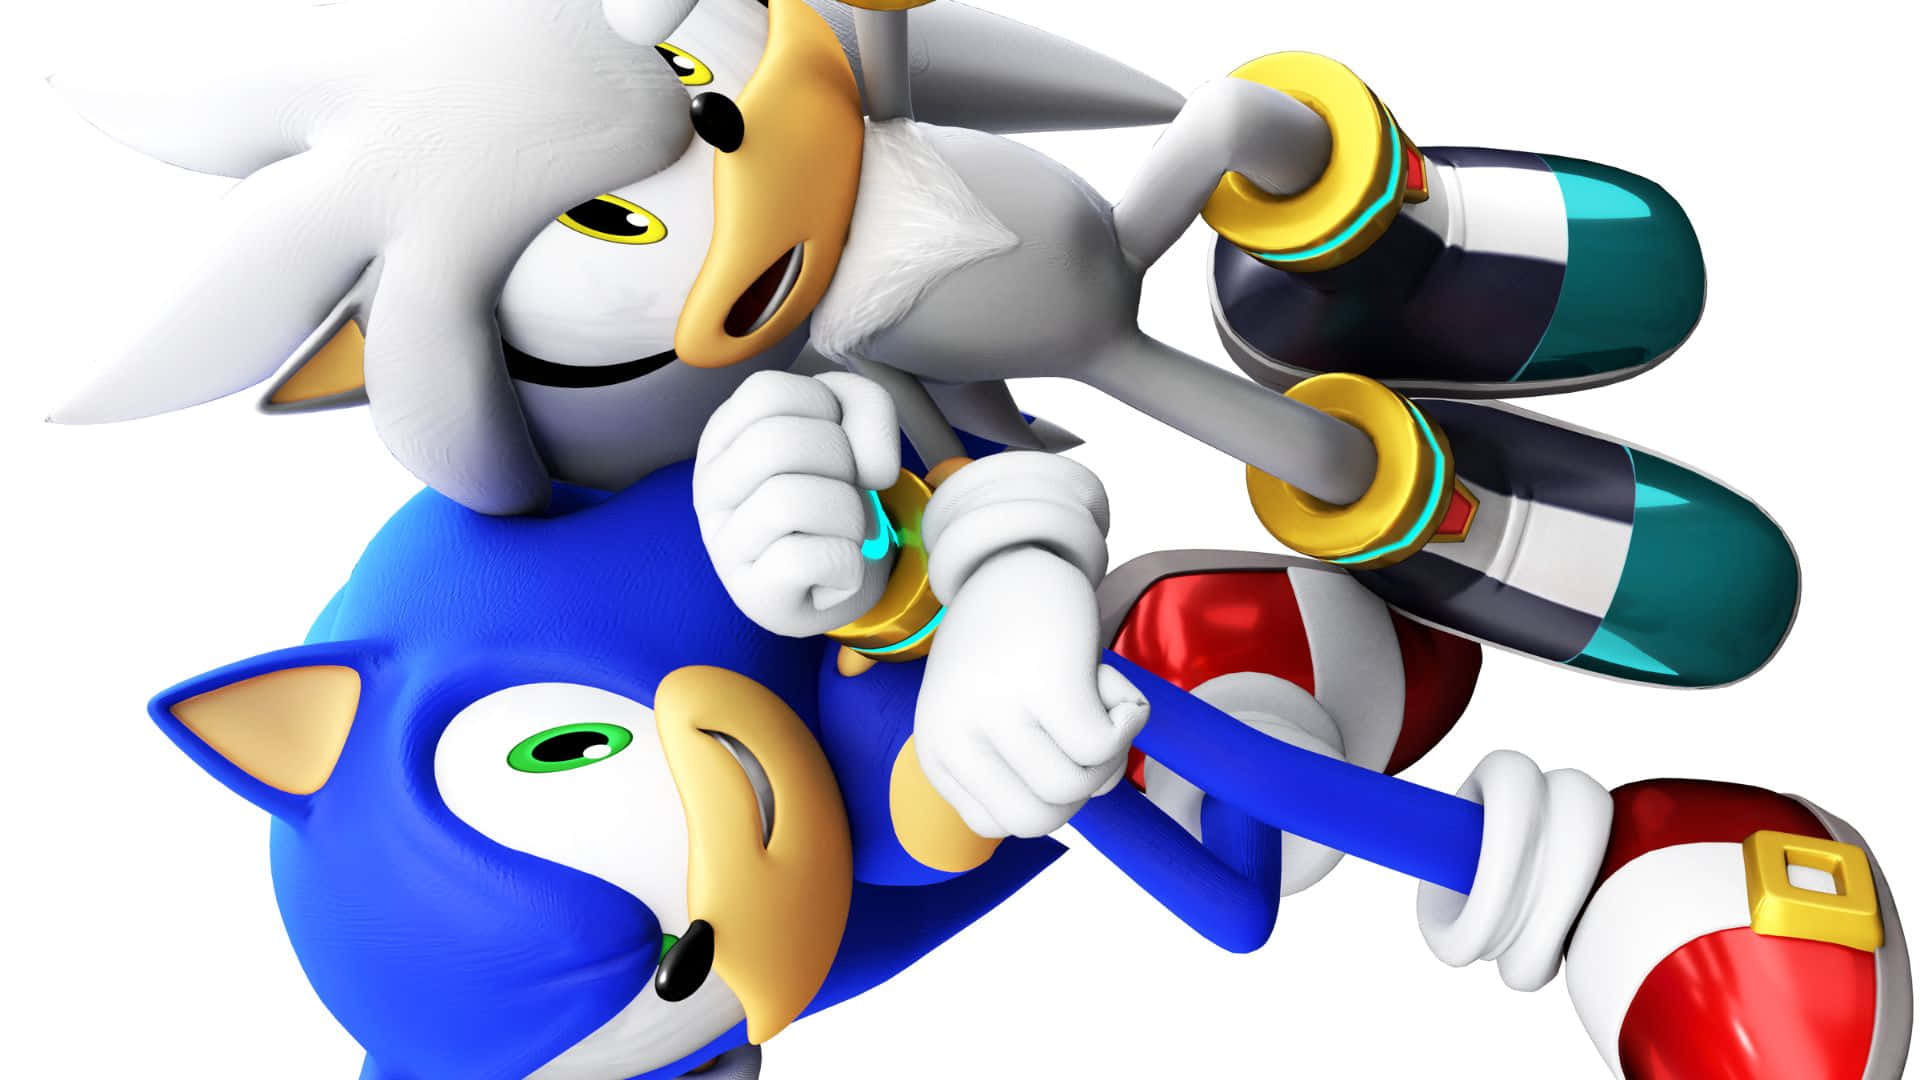 Sonic and Silver in an action-packed scene Wallpaper